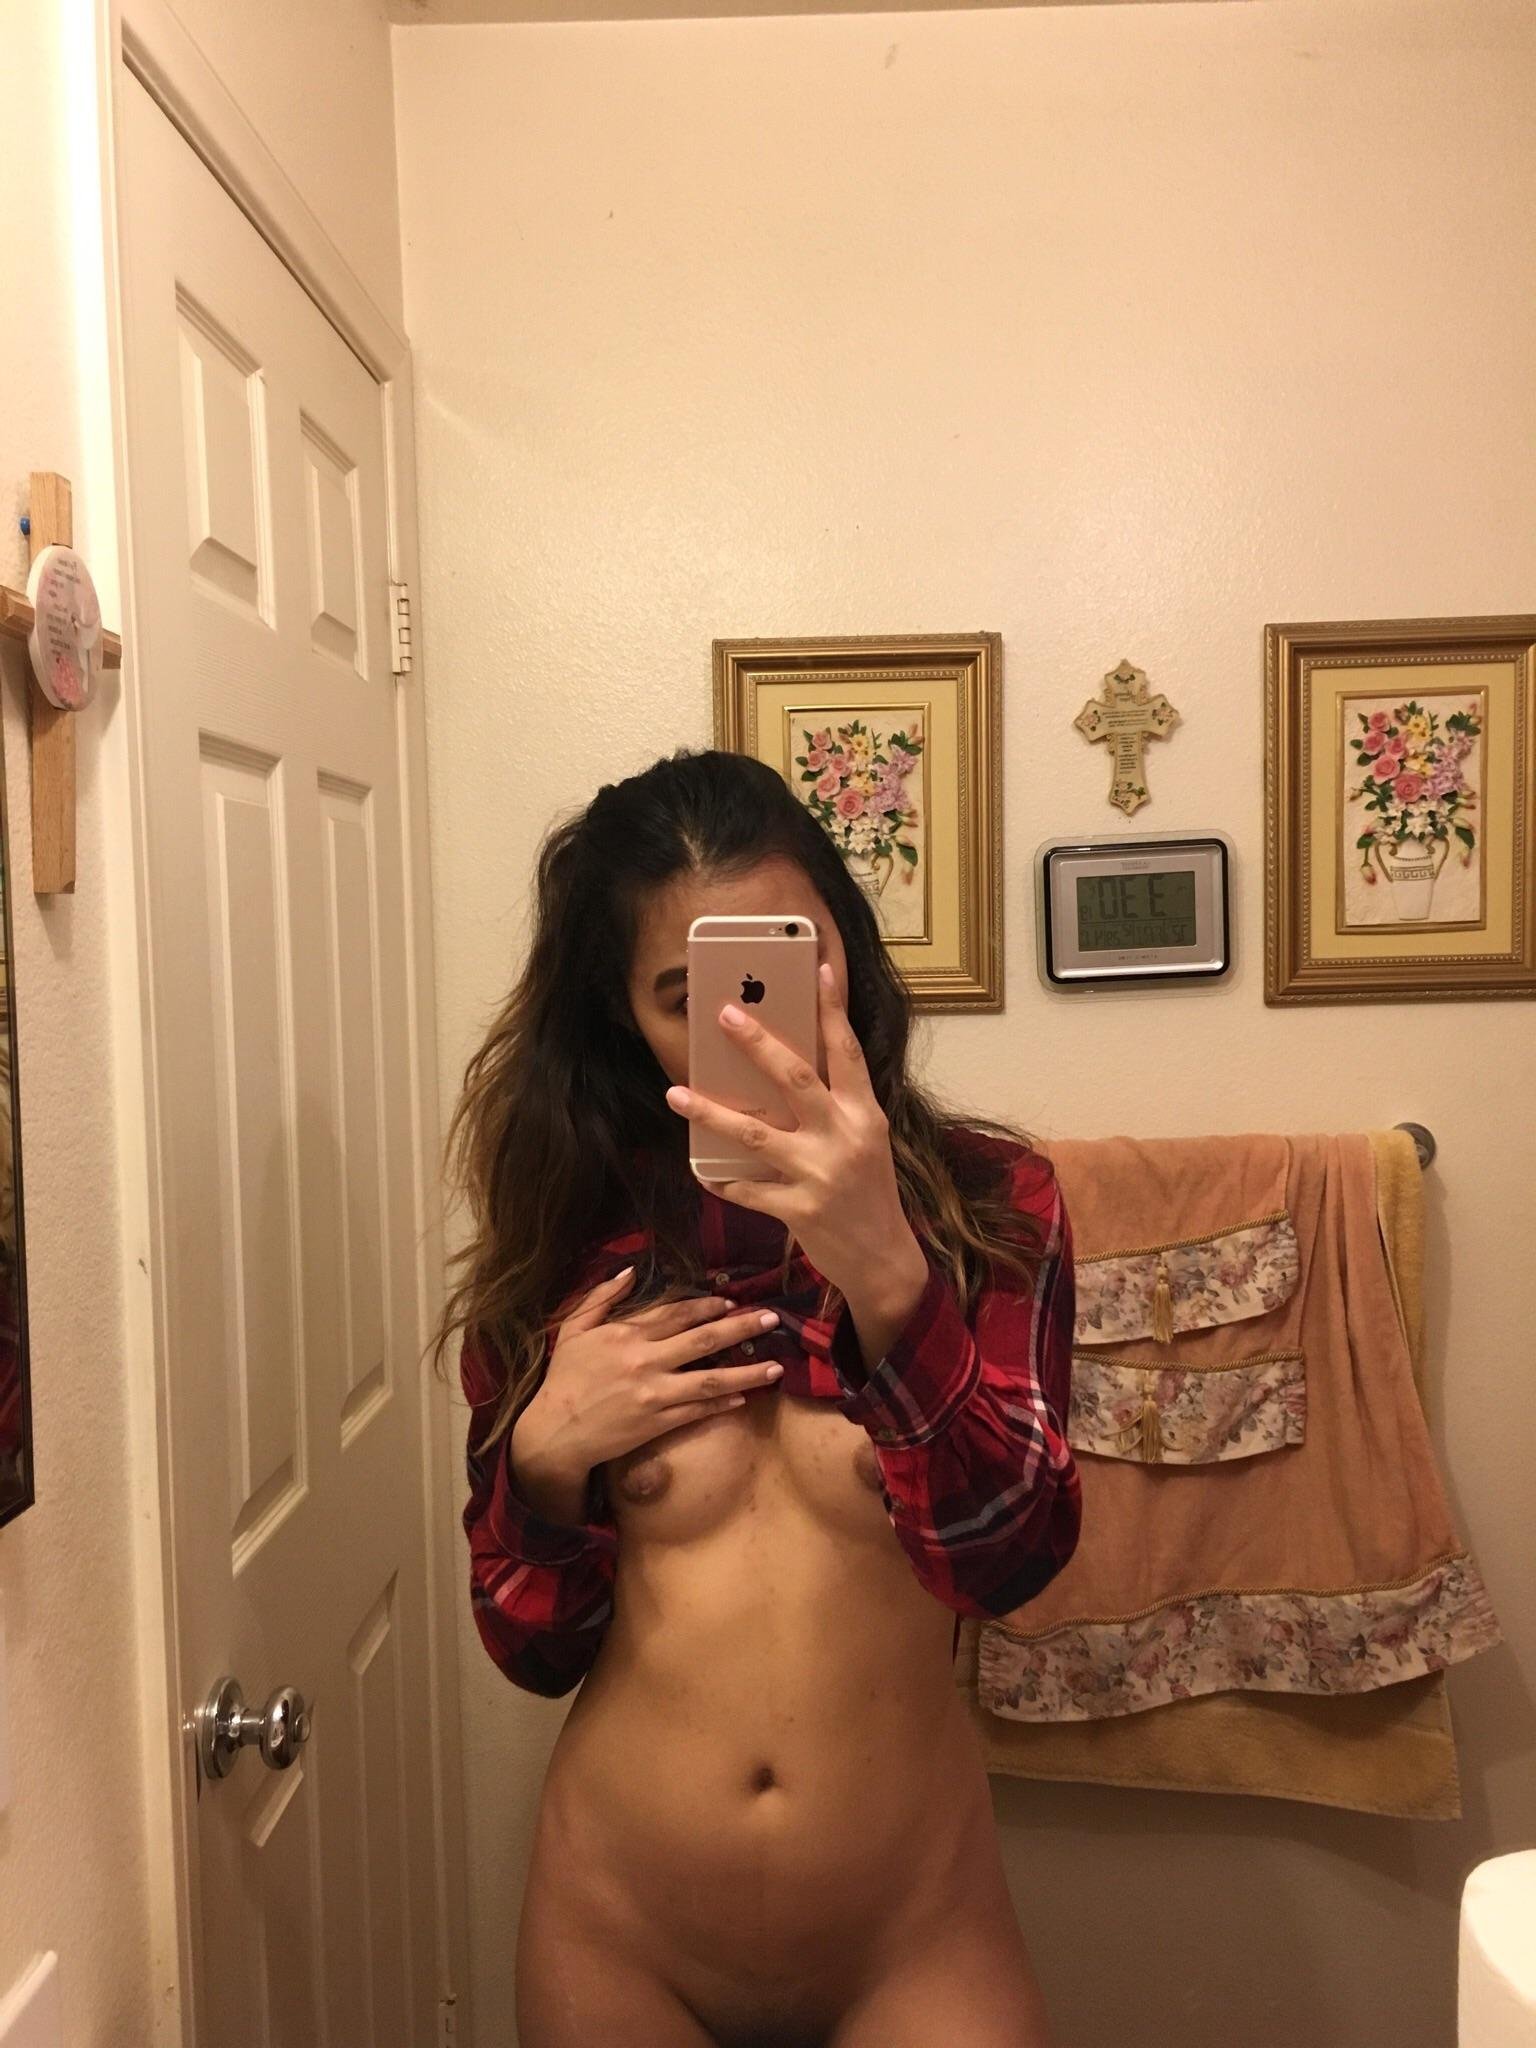 Trying not to take too long before my family (f)inds me ;)